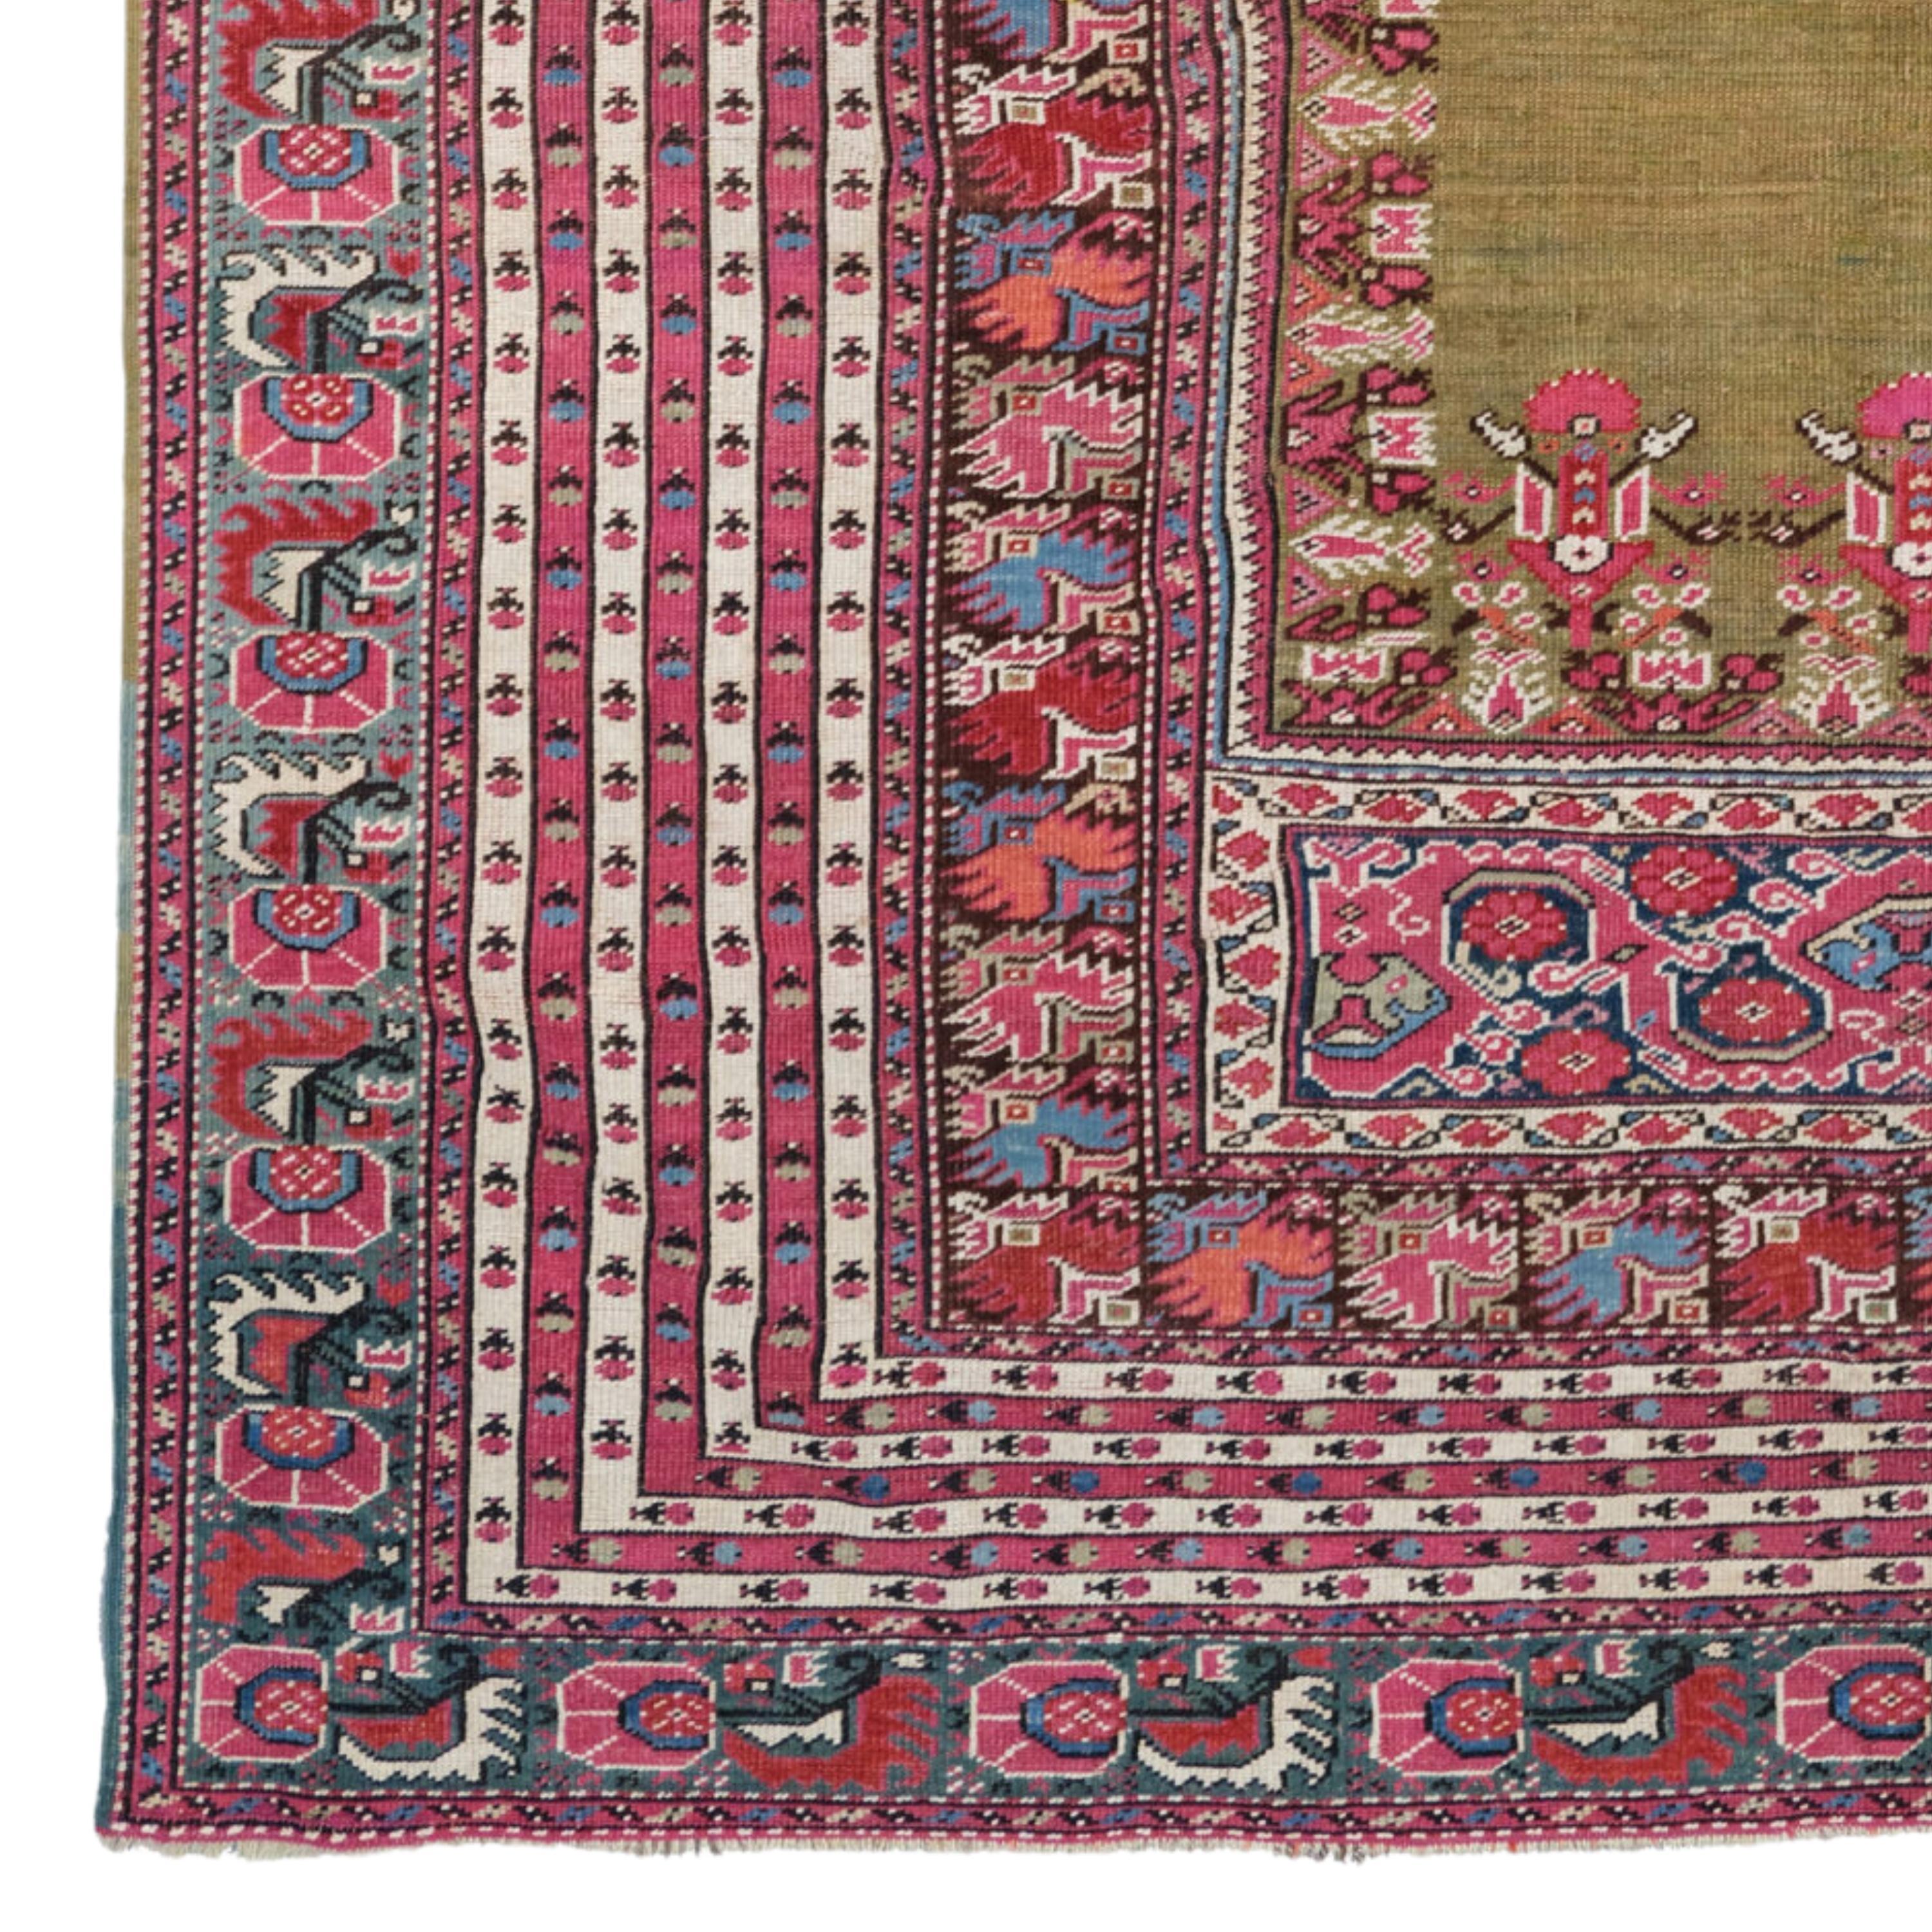 Antique Ghiordes Prayer Rug | Anatolian Rugs
Antique Ghiordes Prayer Rug Circa 1840’s
Size : 155×215 cm (61x84,6 In)

The rug is beautifully drawn with superb pastel colours through out especially the soft green in the field. The multiple stripe